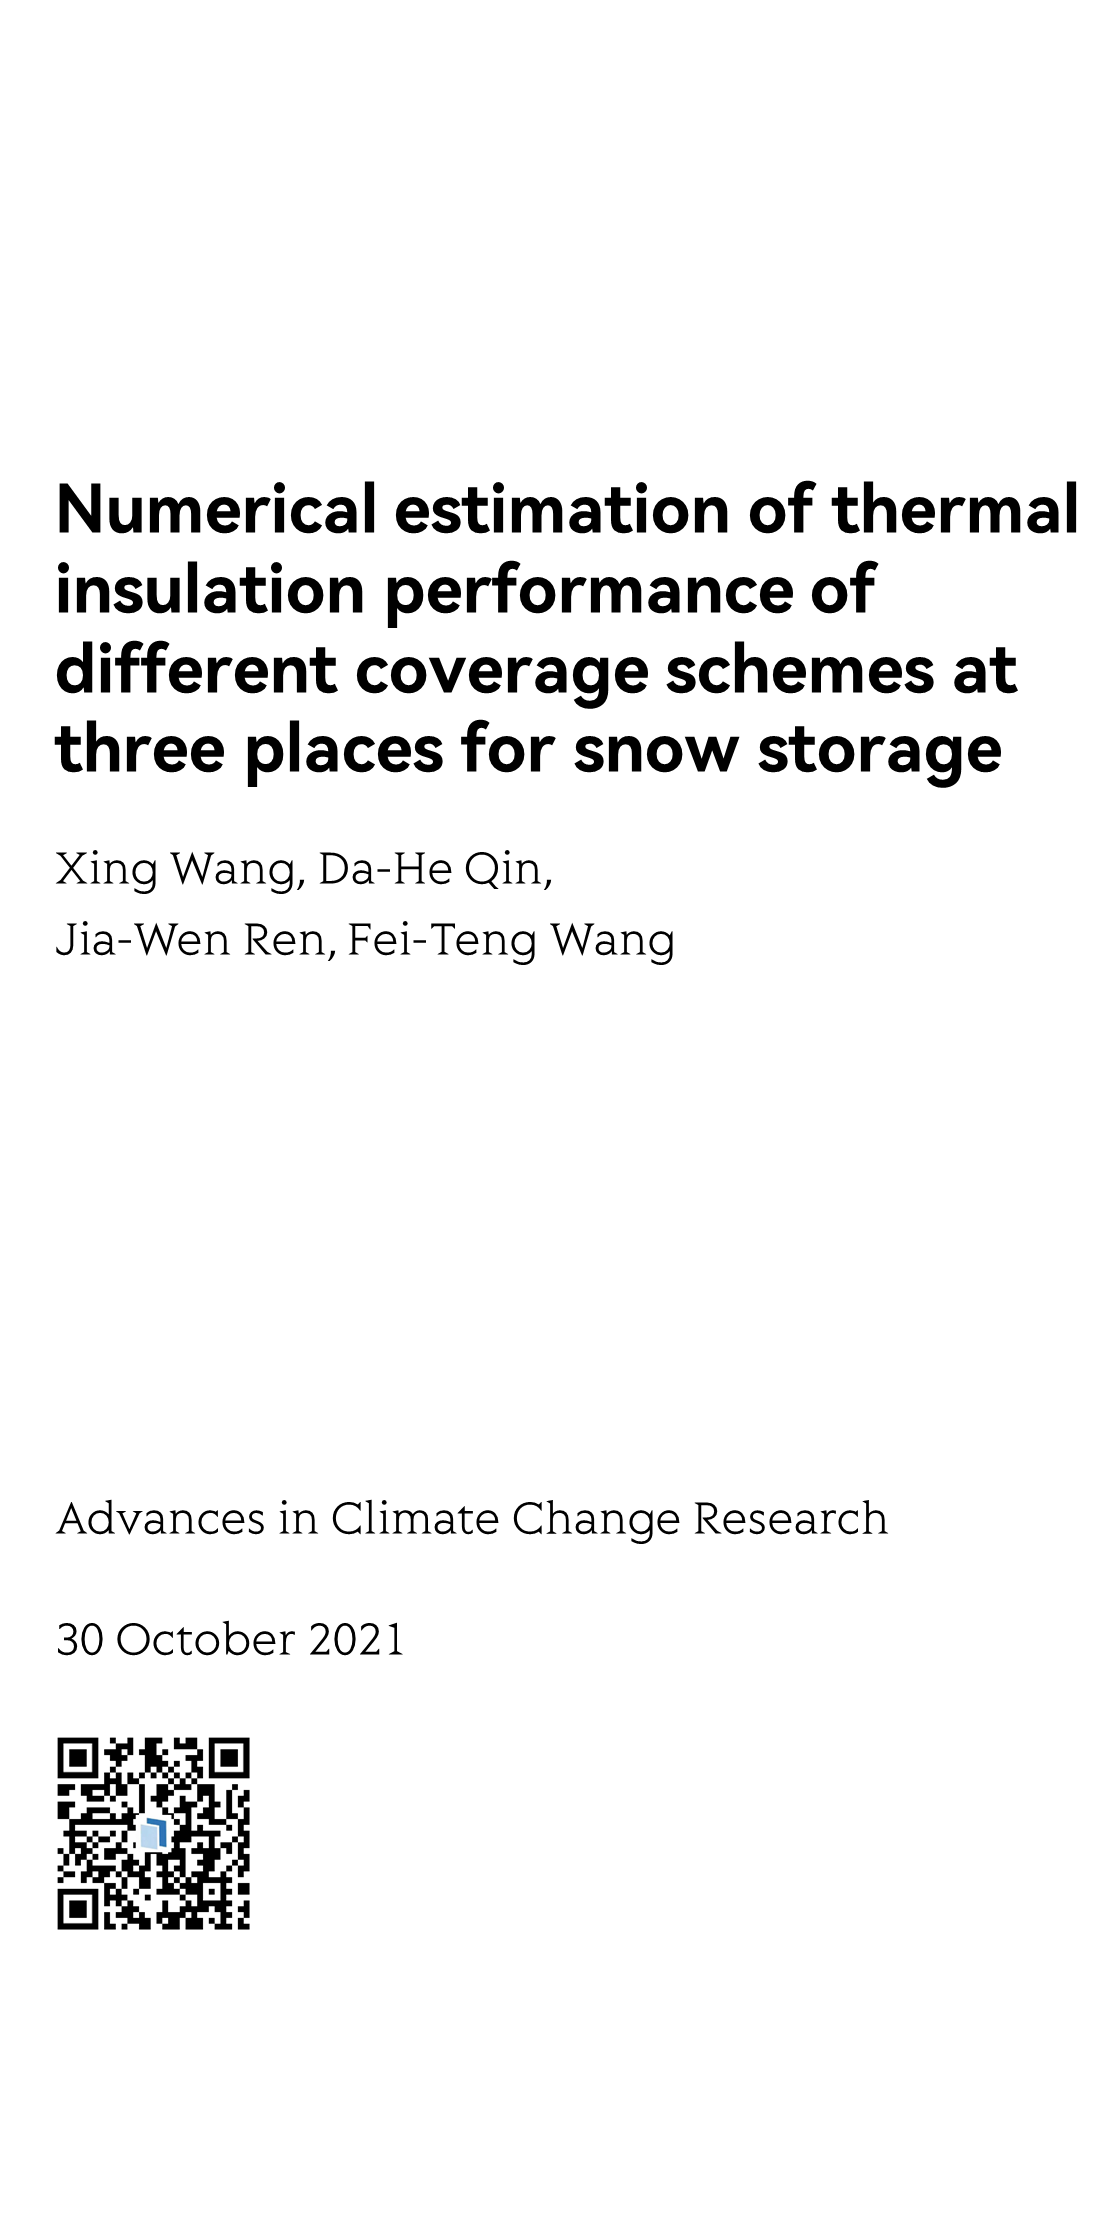 Numerical estimation of thermal insulation performance of different coverage schemes at three places for snow storage_1